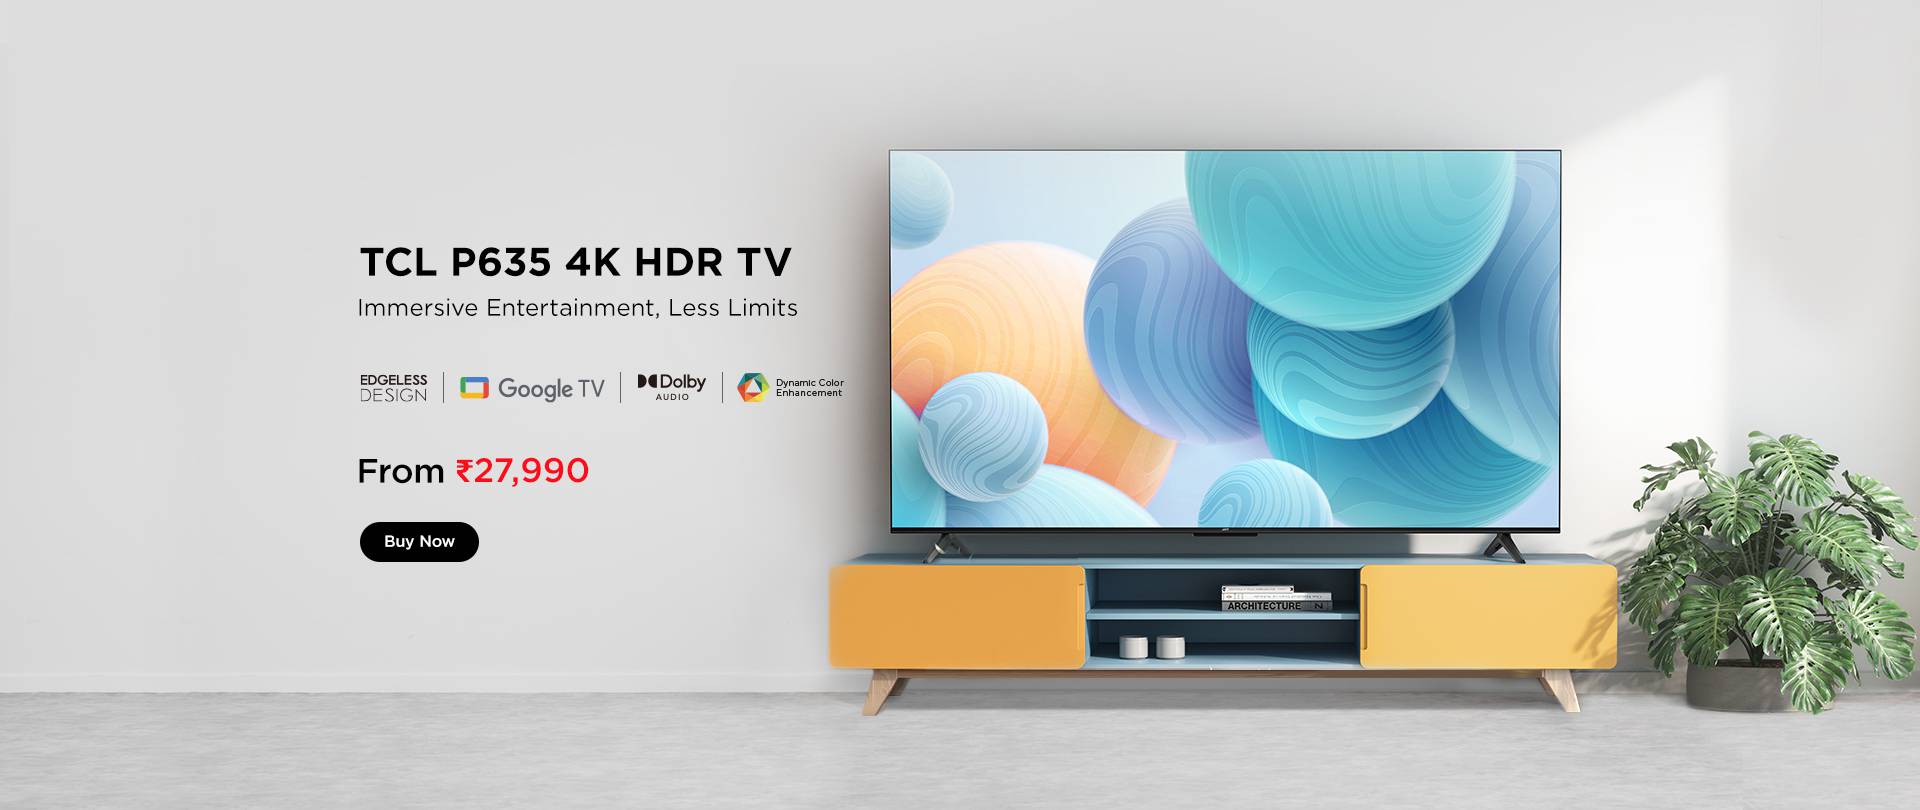 TCL P635 4K HDR TV